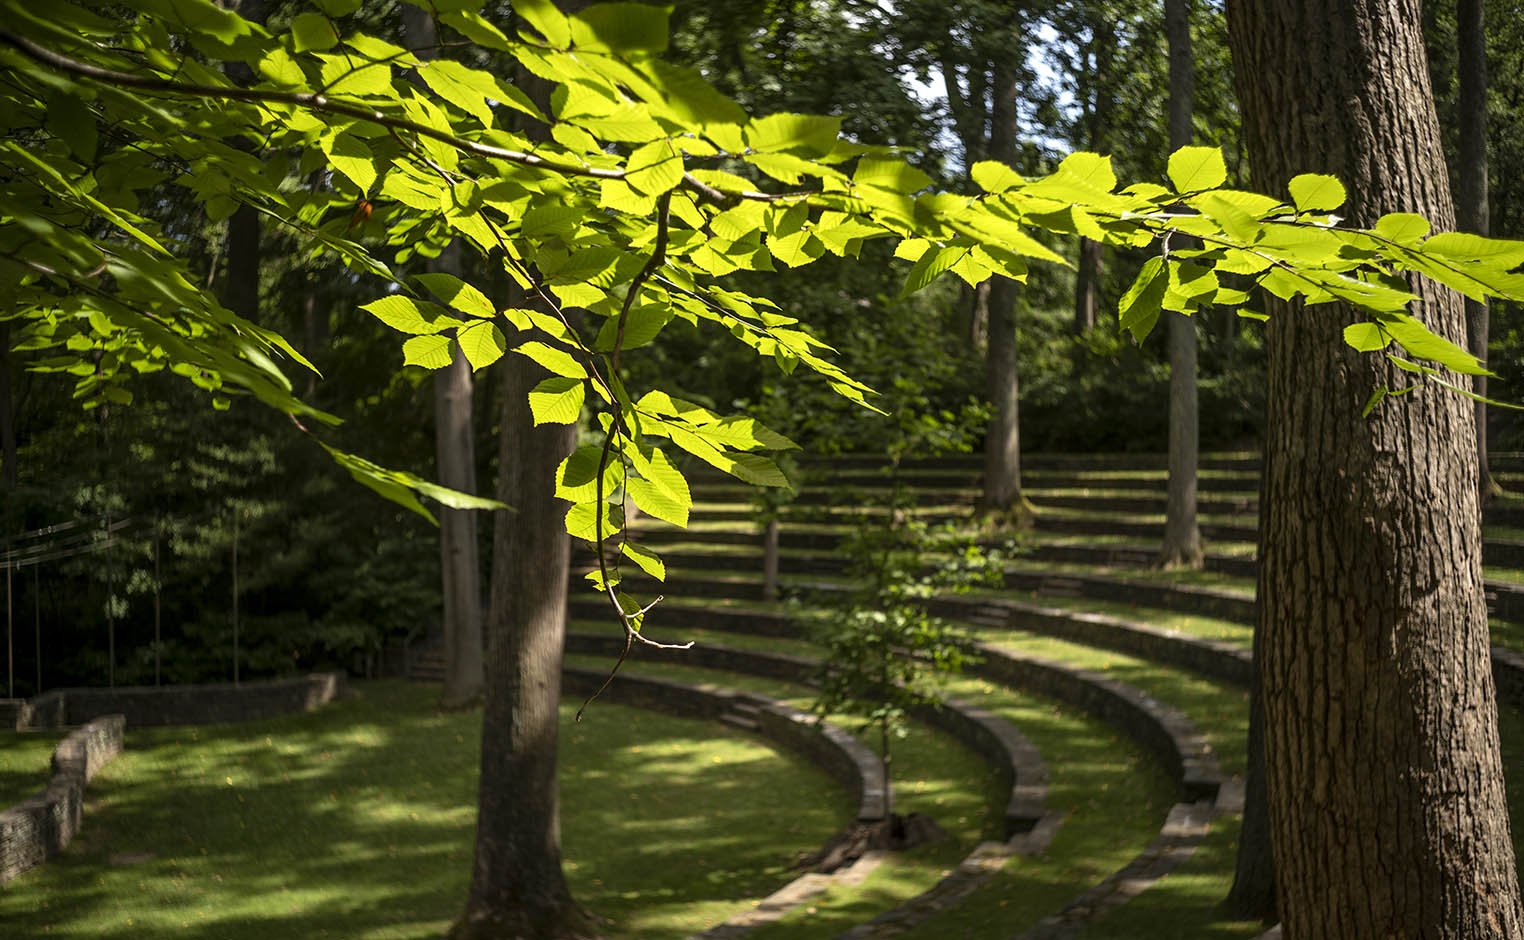 amphitheater in spring time